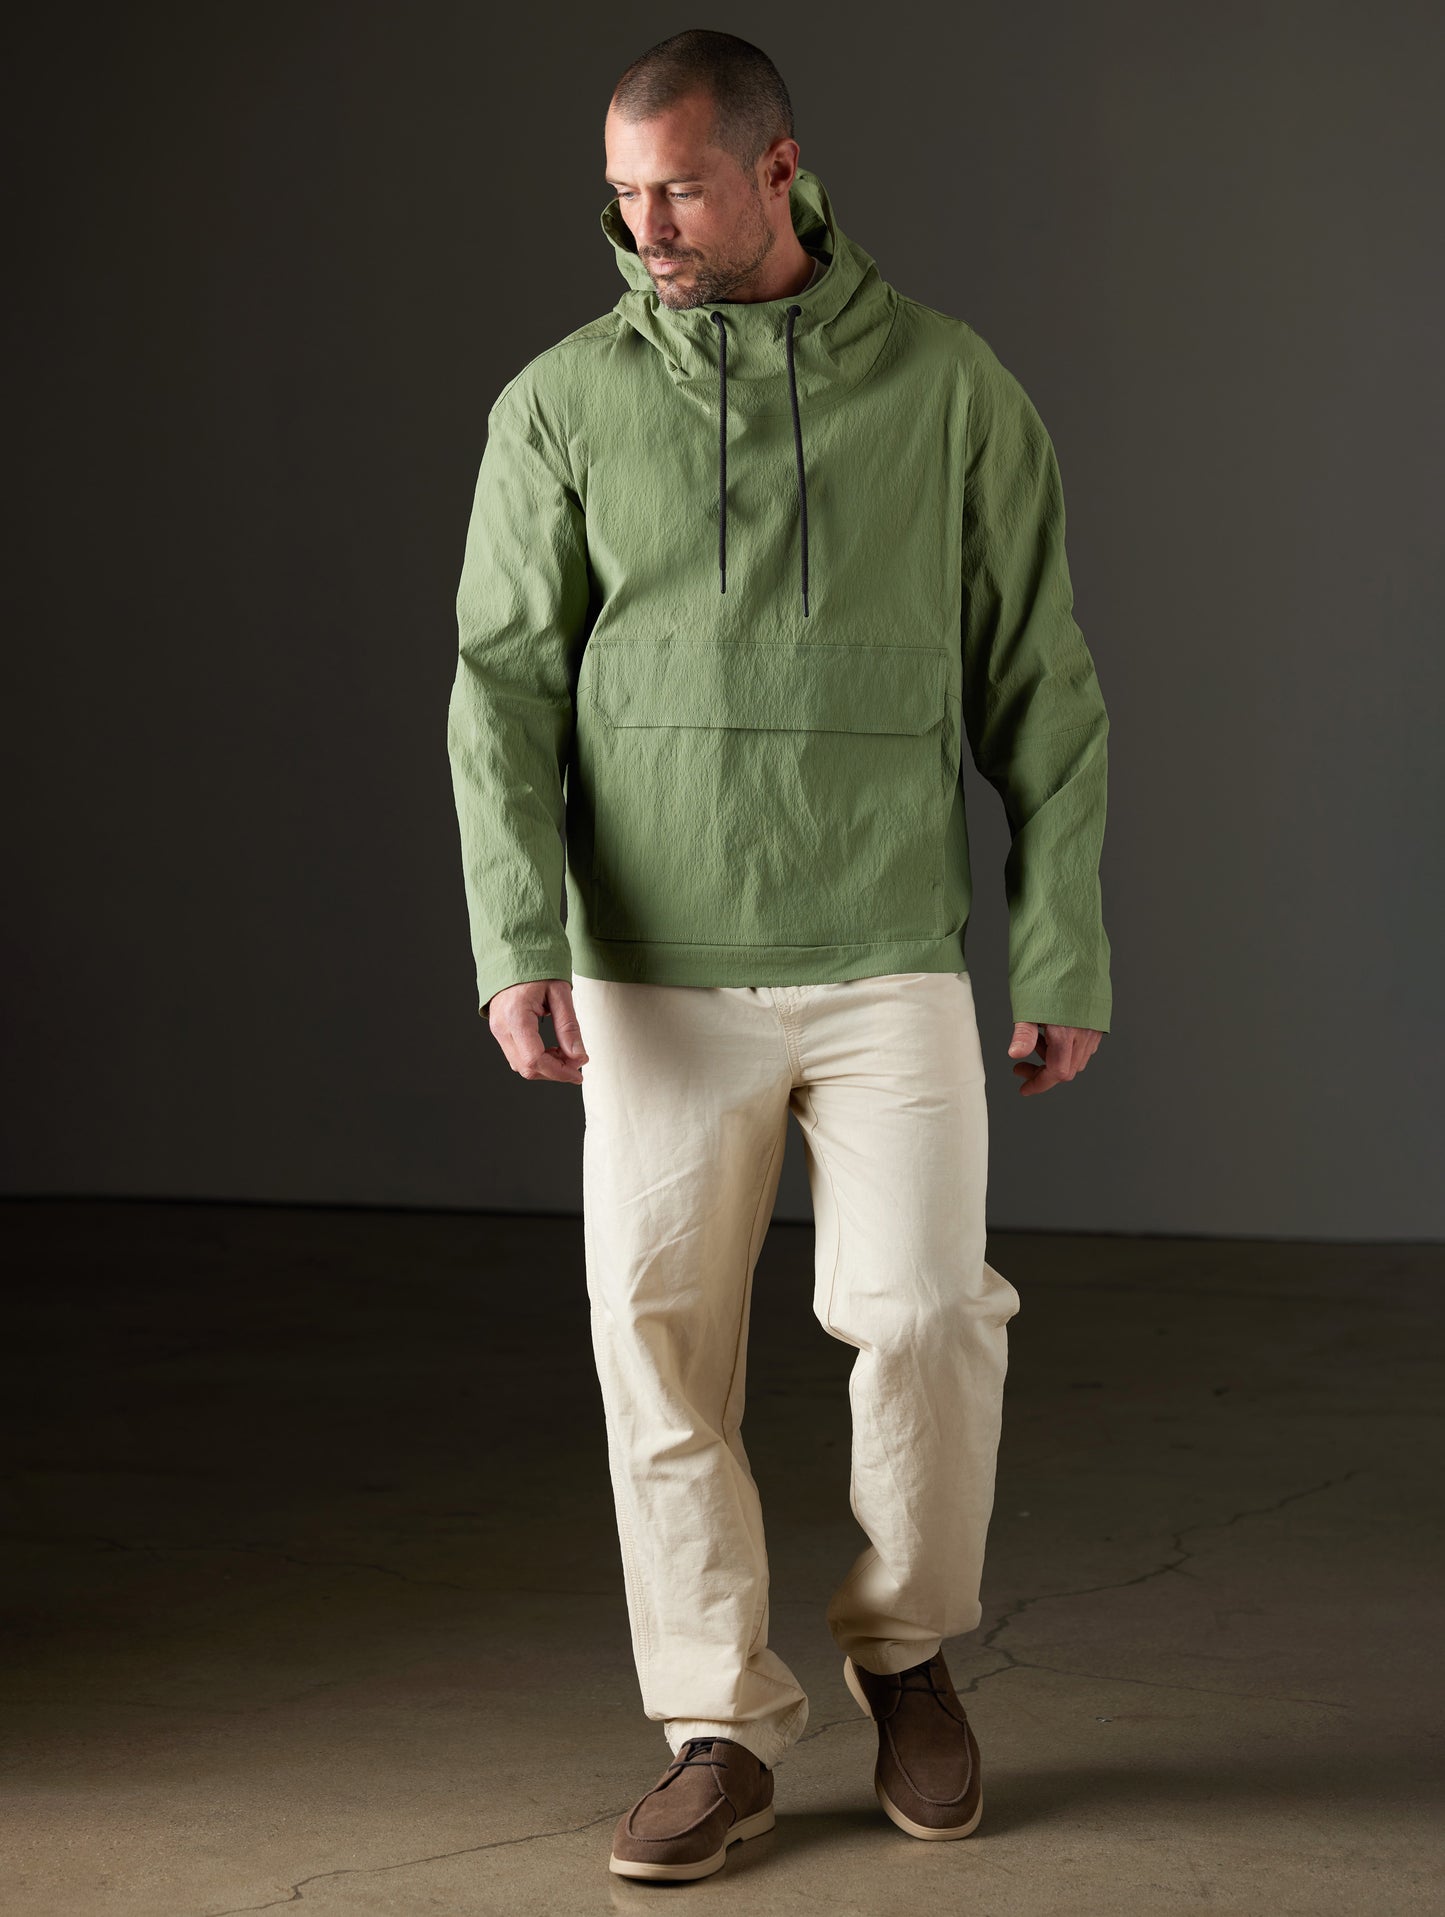 Man wearing green anorak from AETHER Apparel